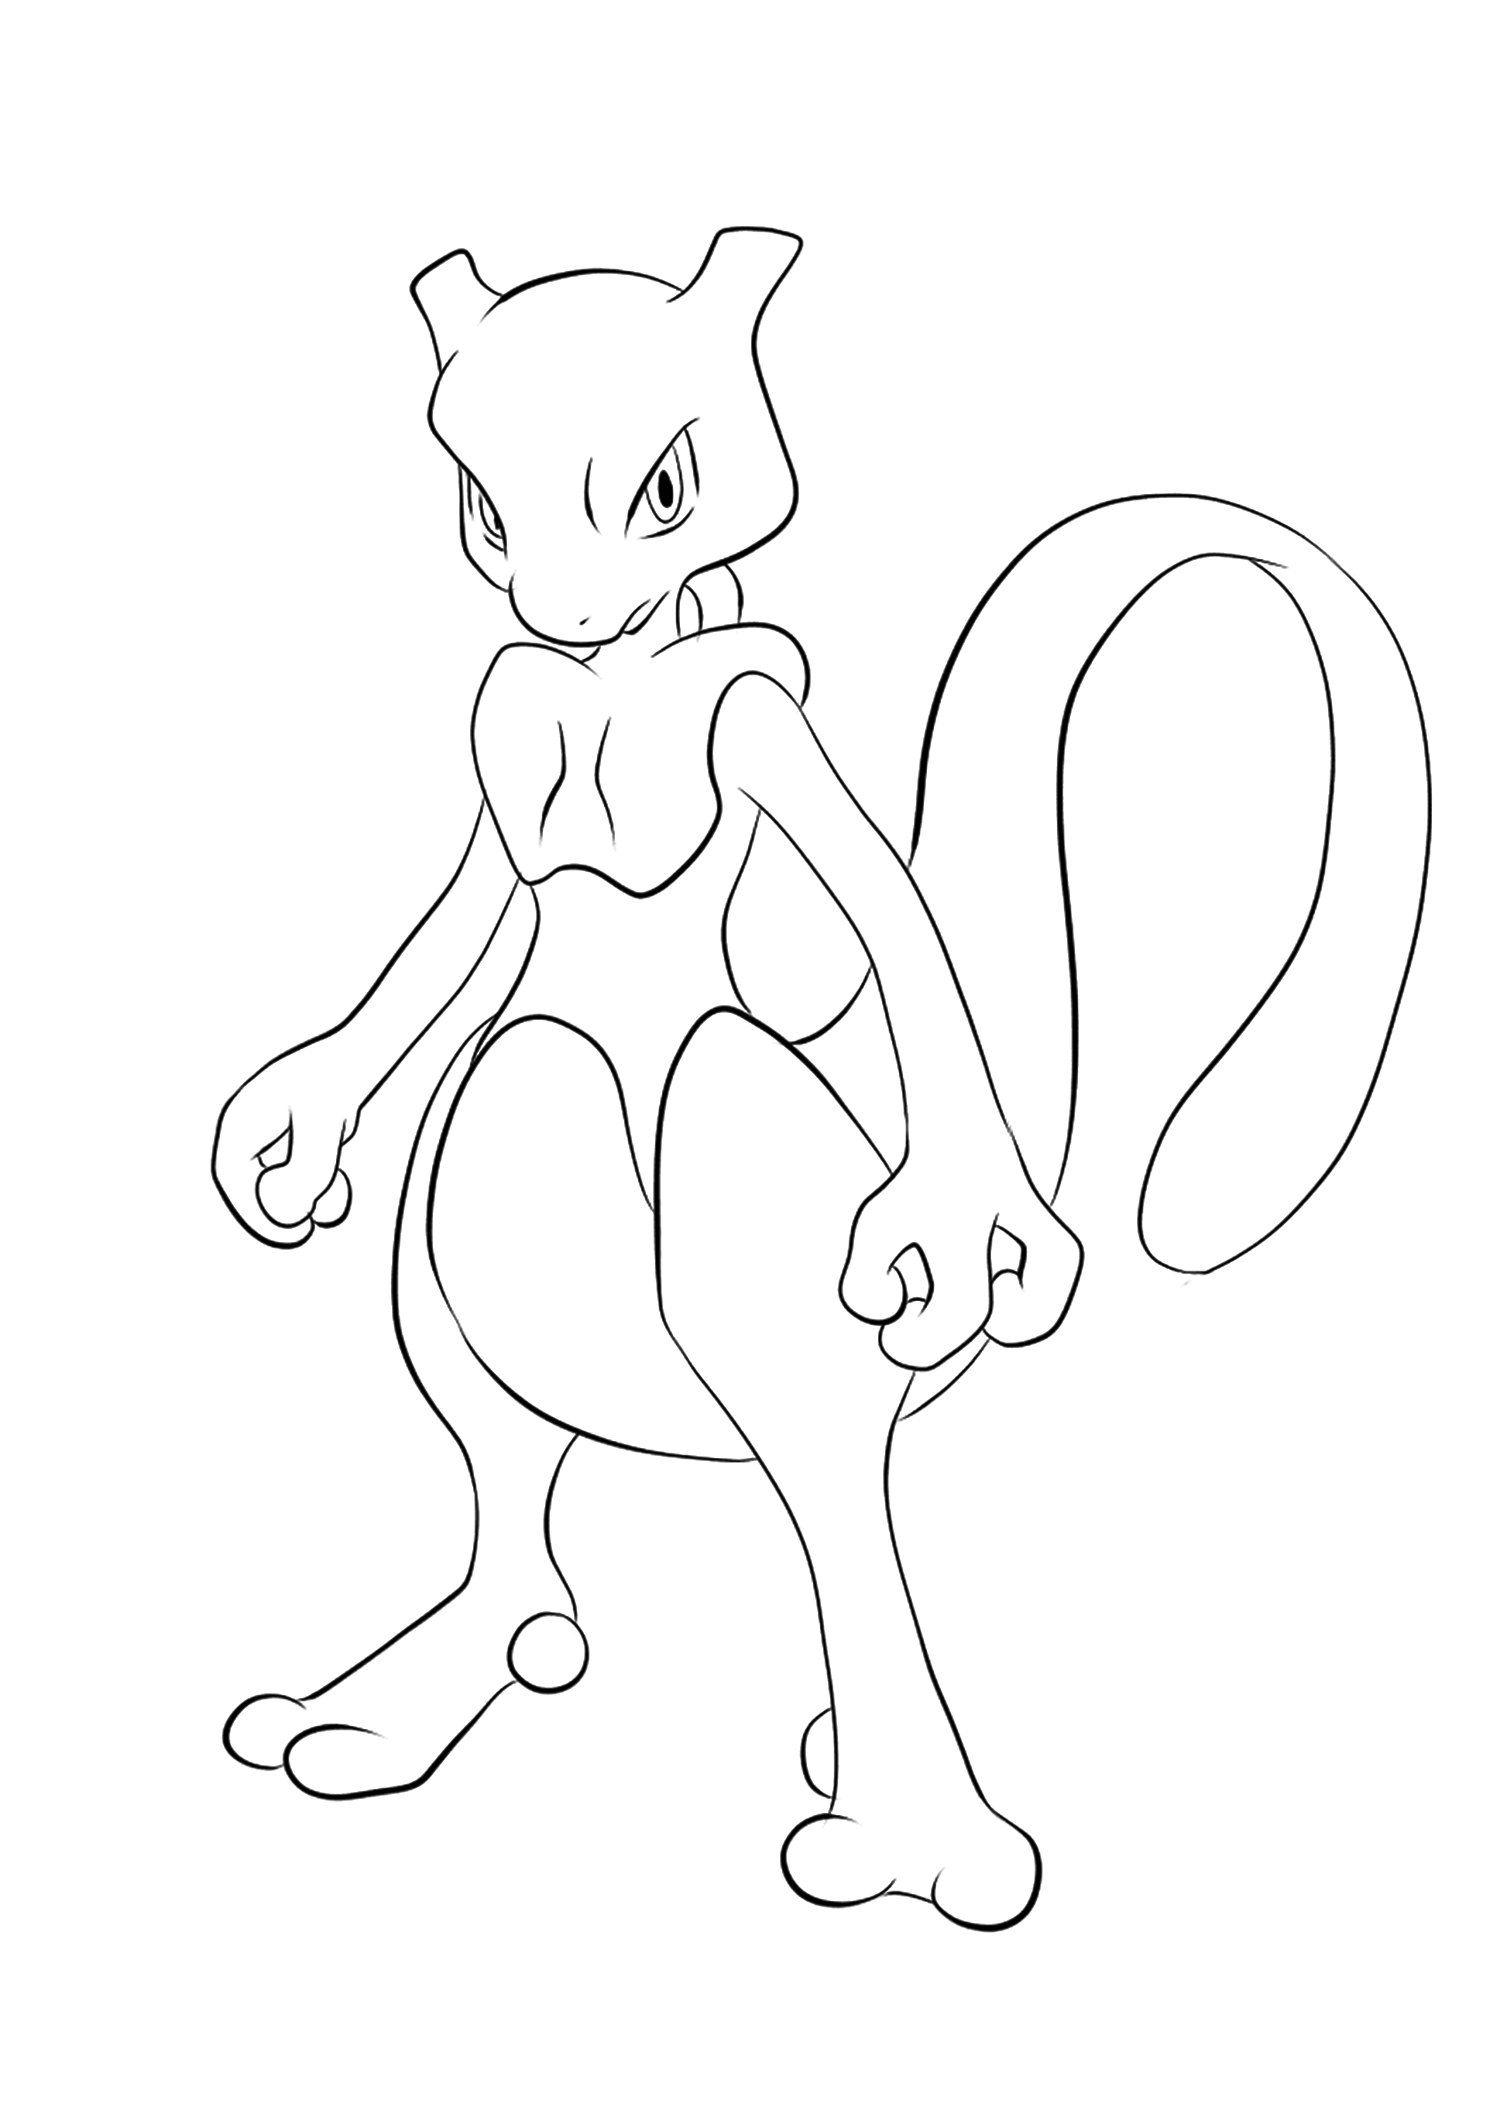 Mewtwo No.20  Pokemon Generation I   All Pokemon coloring pages ...